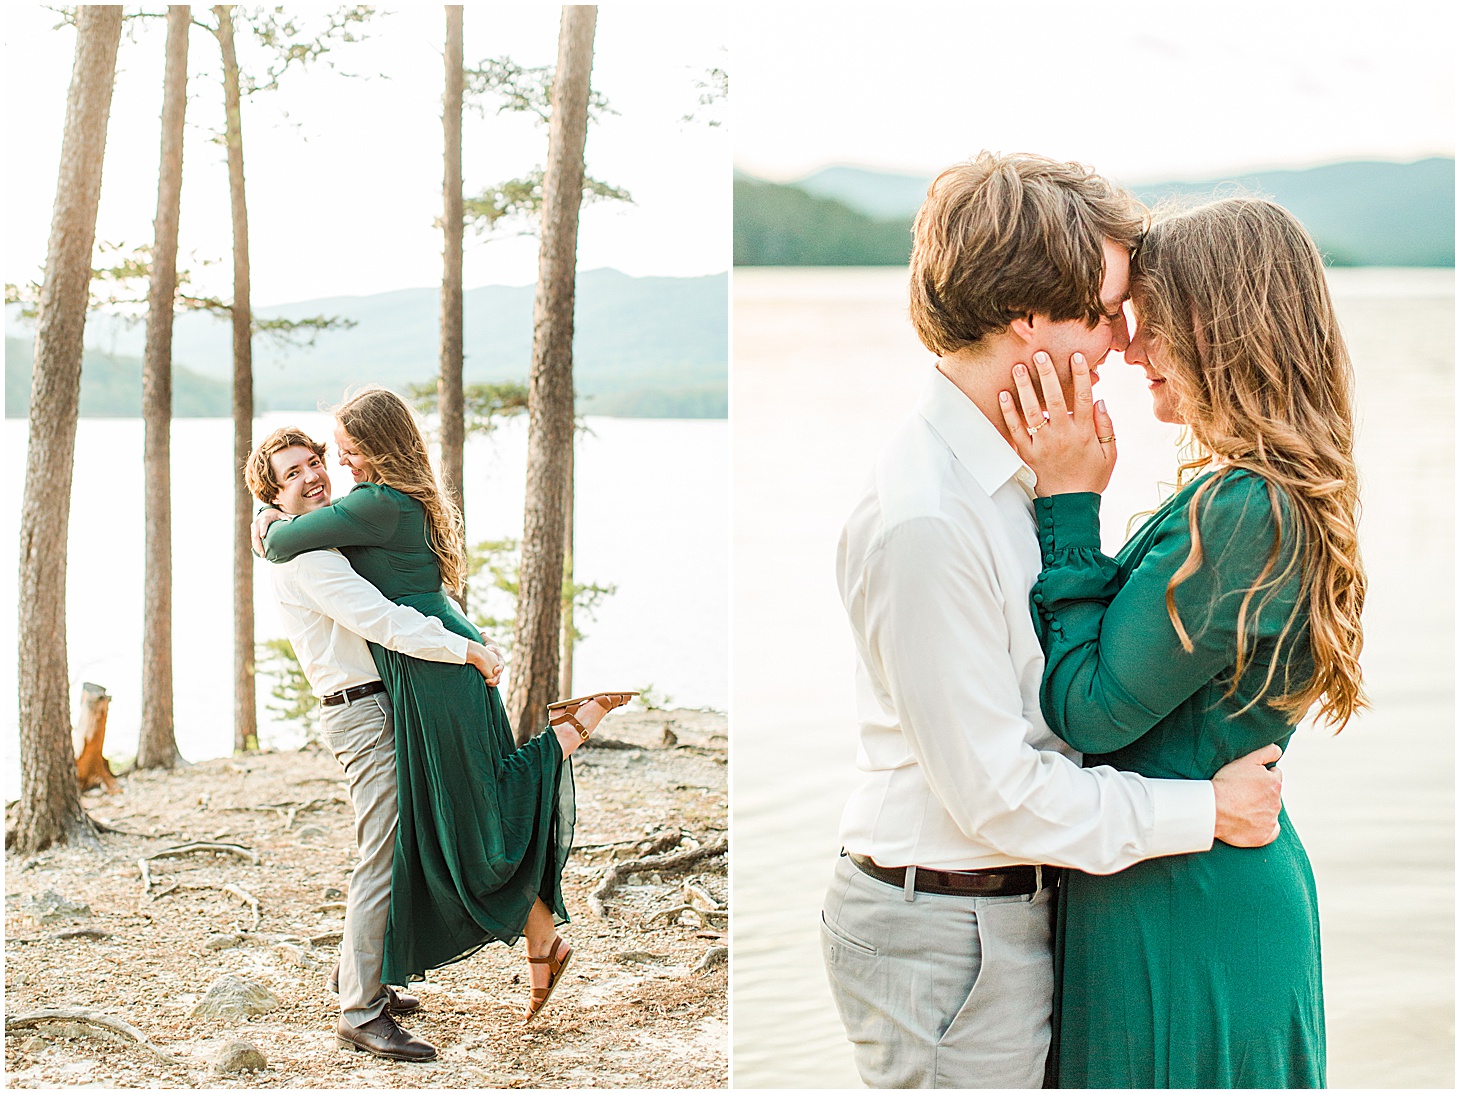 carvinscoveengagementsession_roanokeengagementsession_carvinscove_virginiawedding_virginiaweddingphotographer_vaweddingphotographer_photo_0070.jpg